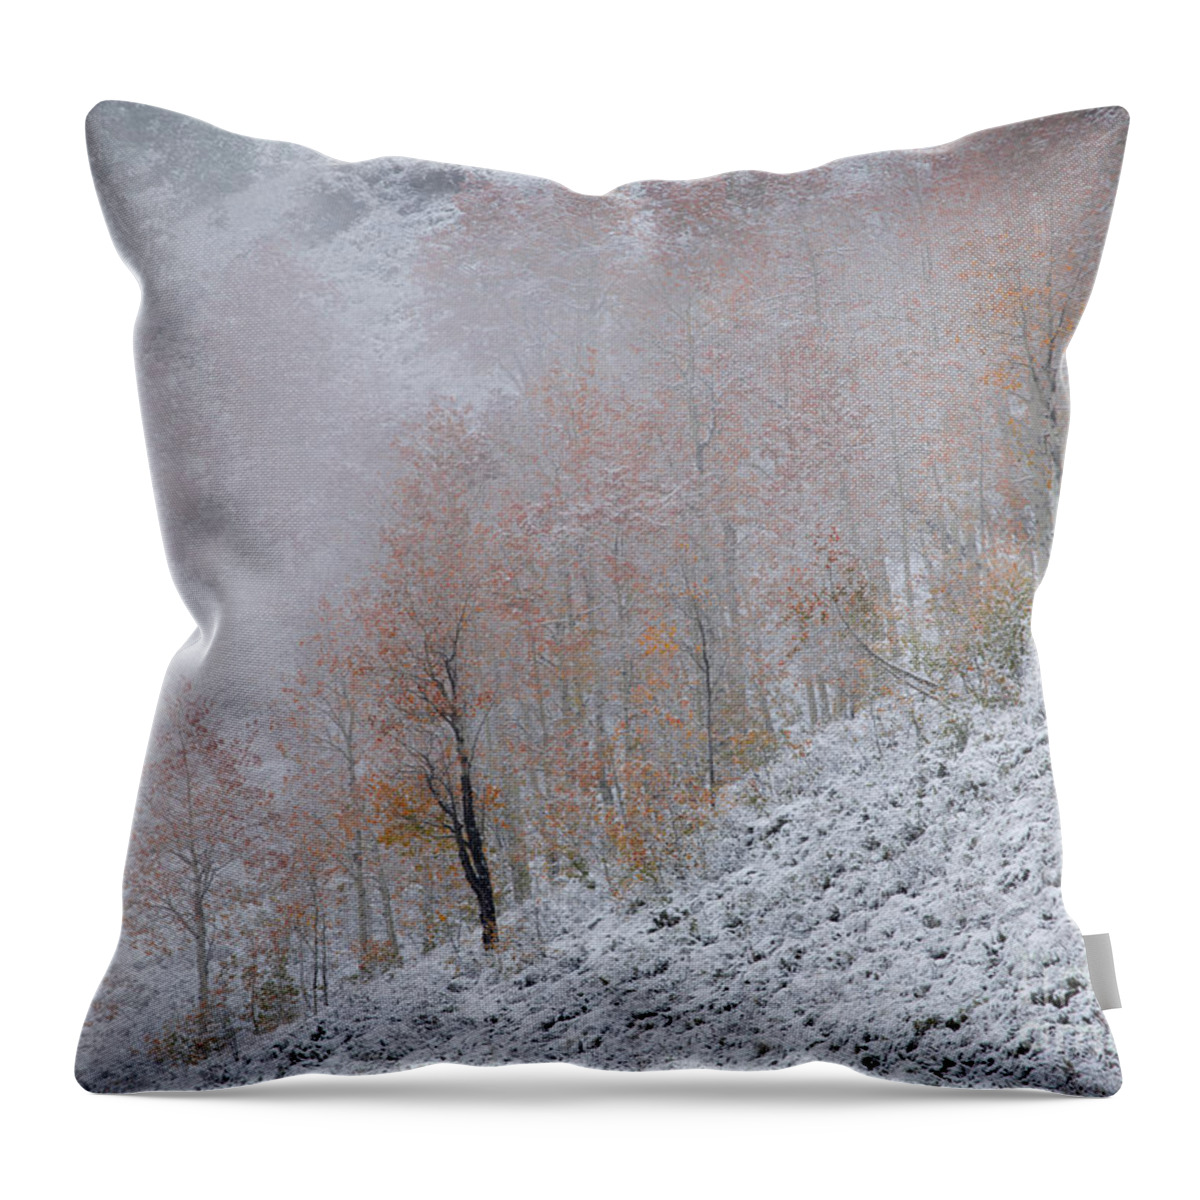 Central Colorado Throw Pillow featuring the photograph Aspen Snow by Idaho Scenic Images Linda Lantzy